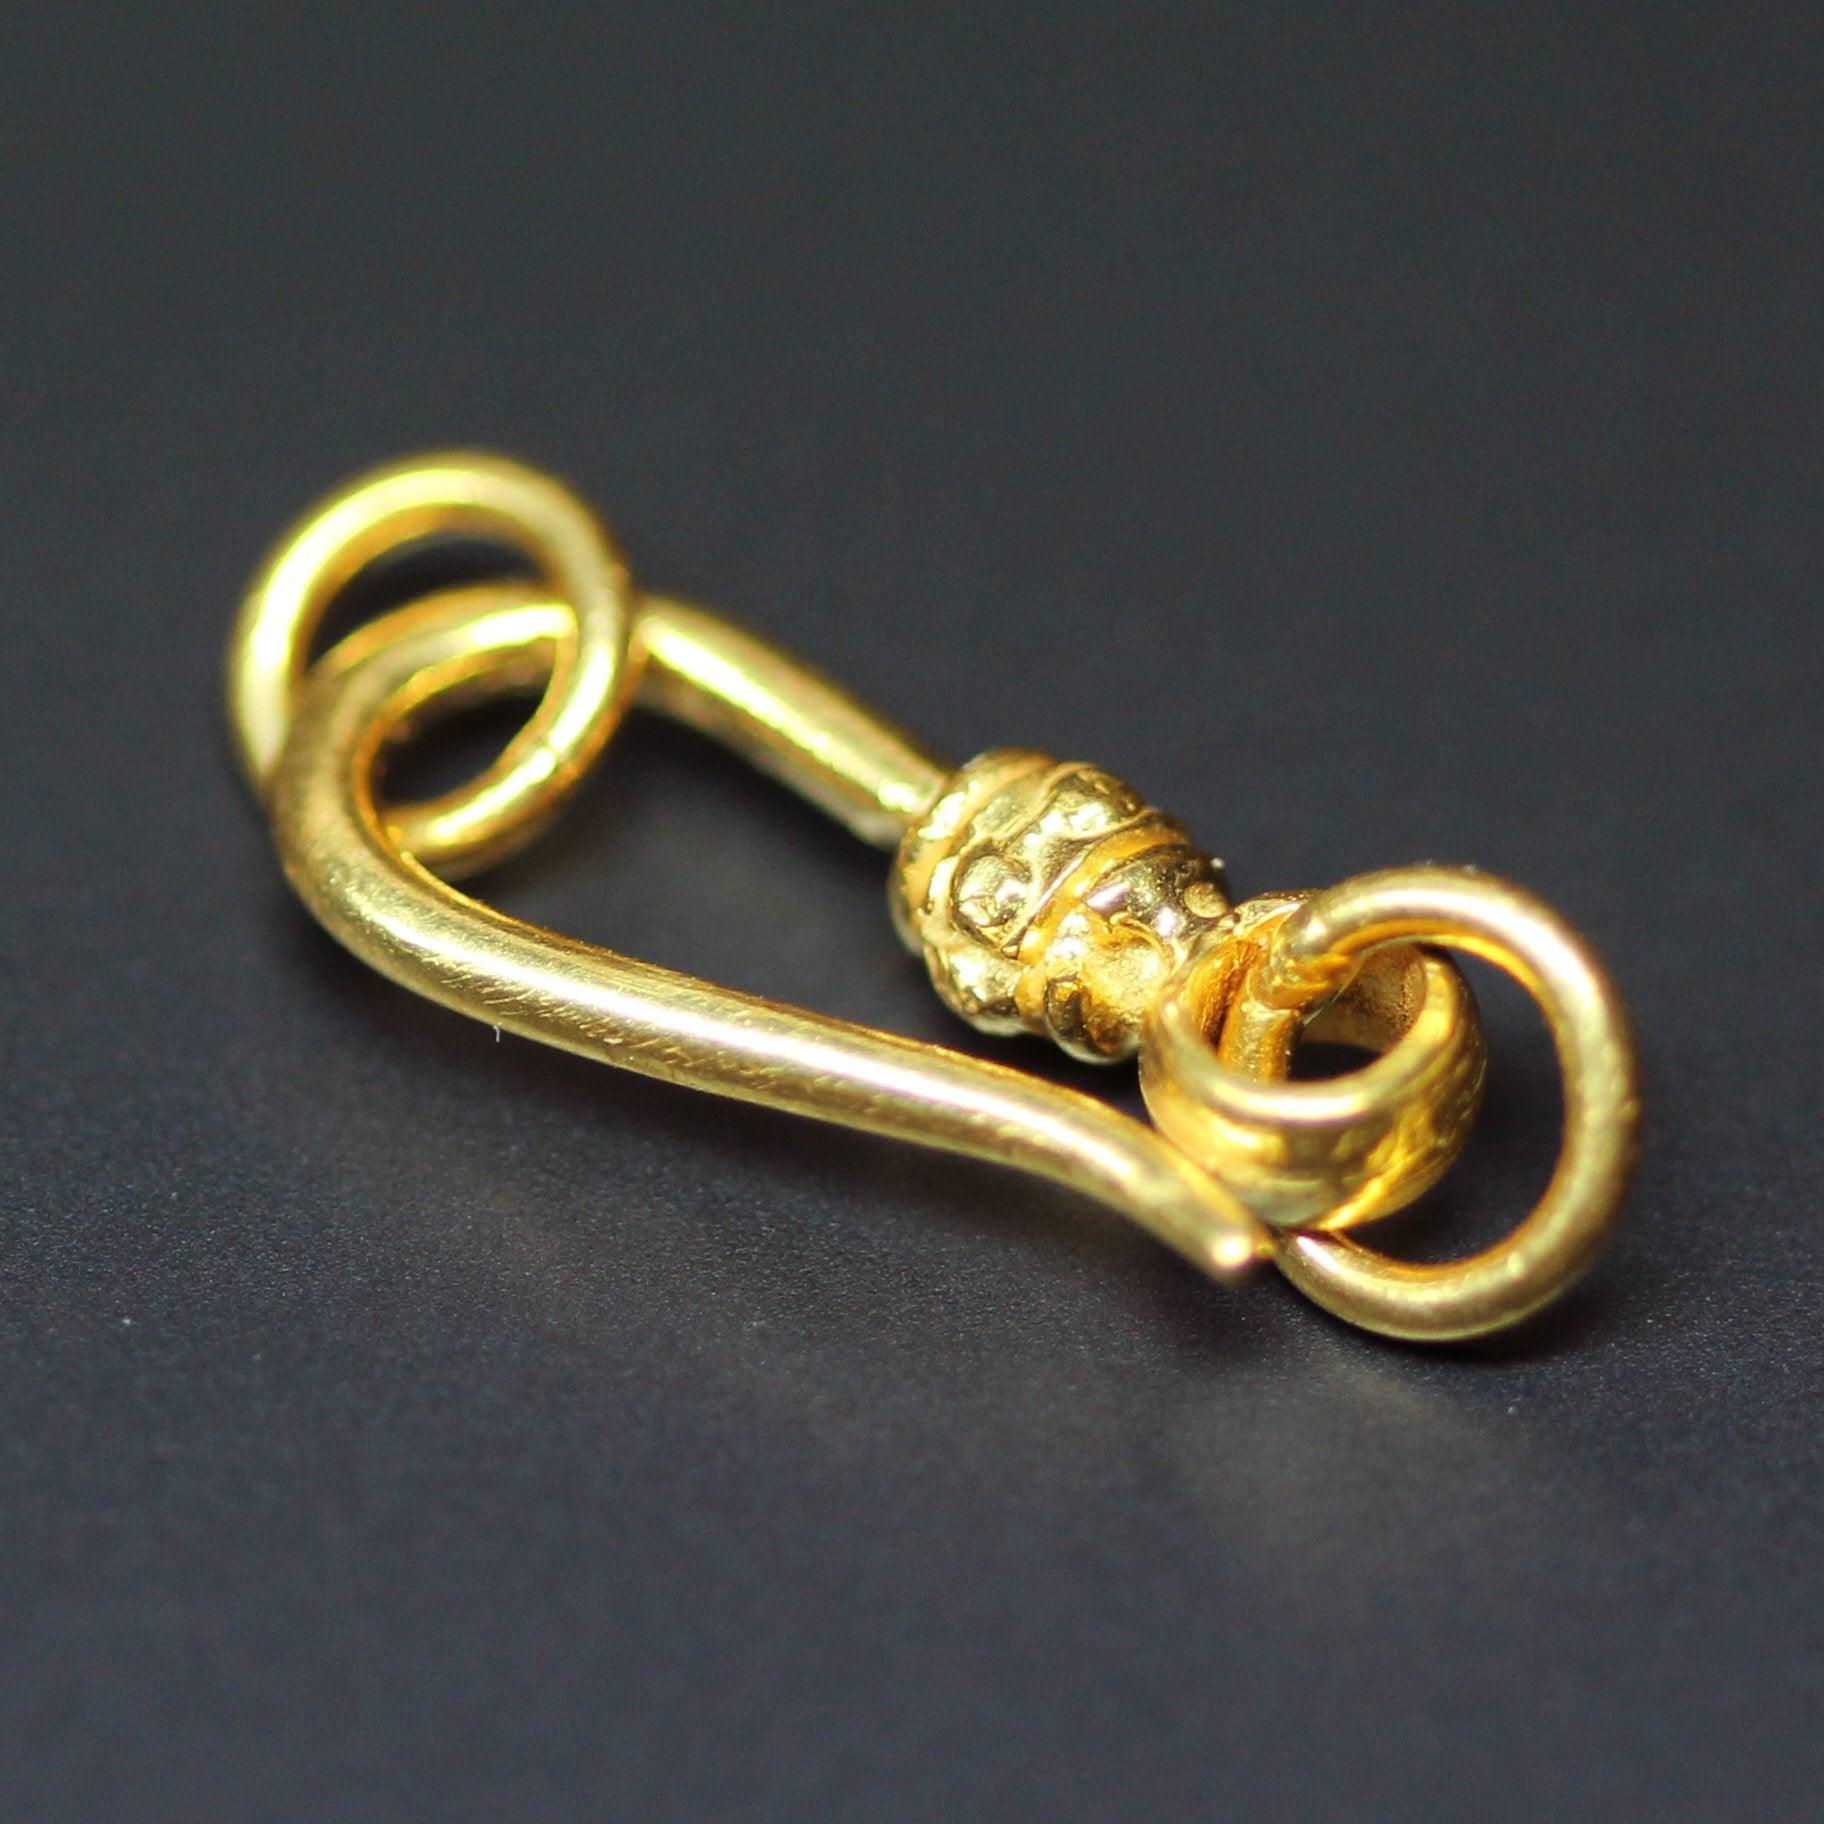 Solid Gold Clasp 18k Handmade Old Fashioned Tribal Hook 11mm x 5mm